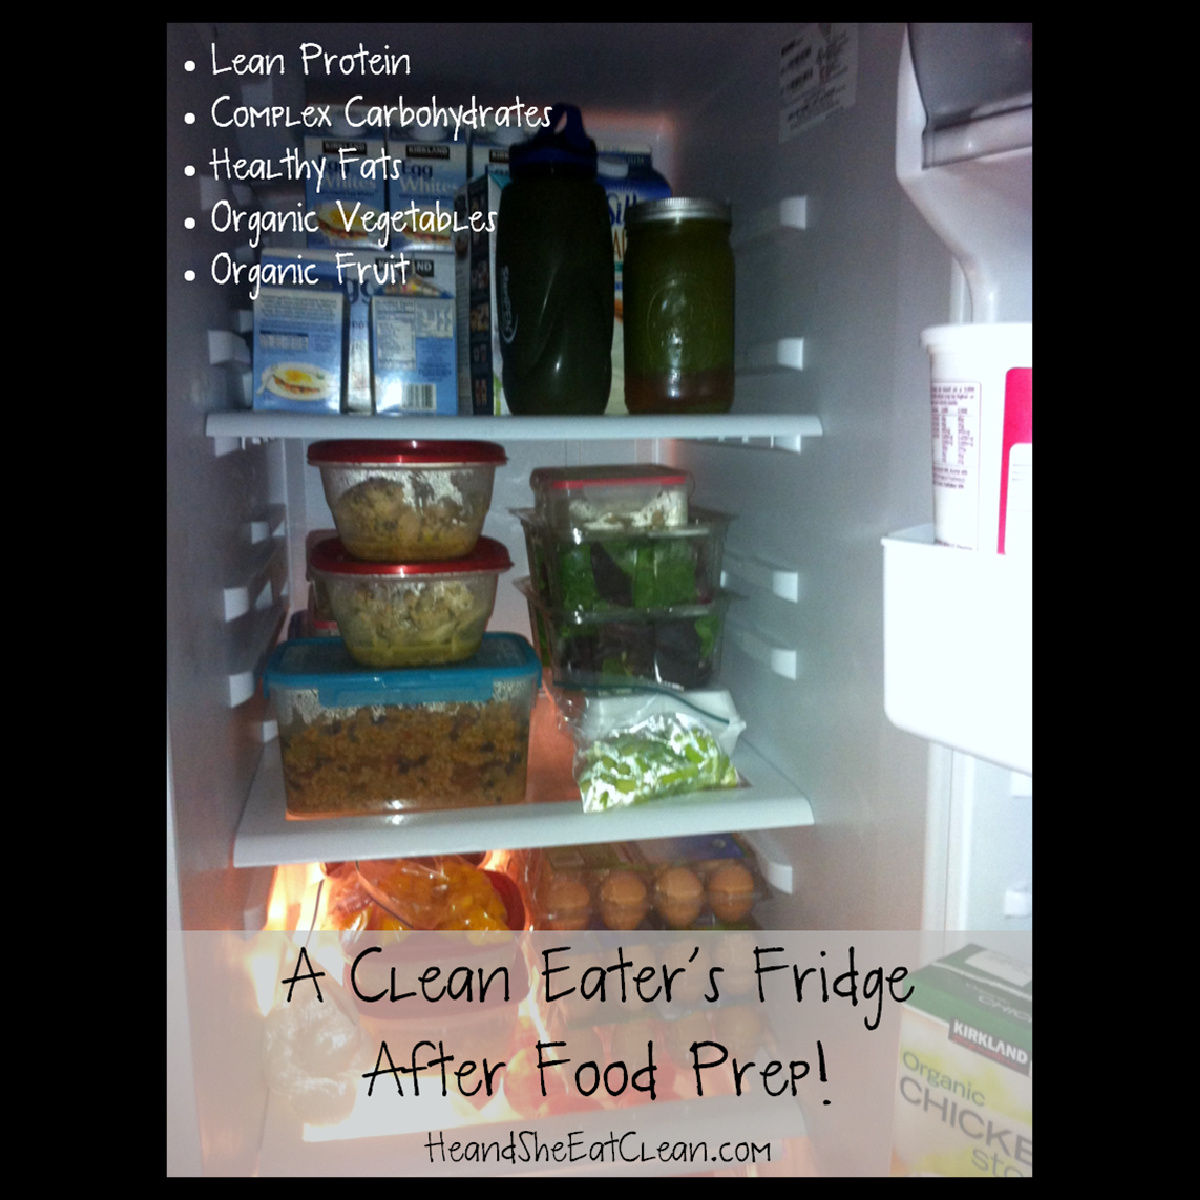 inside view of a refrigerator with food in plastic containers after food prep